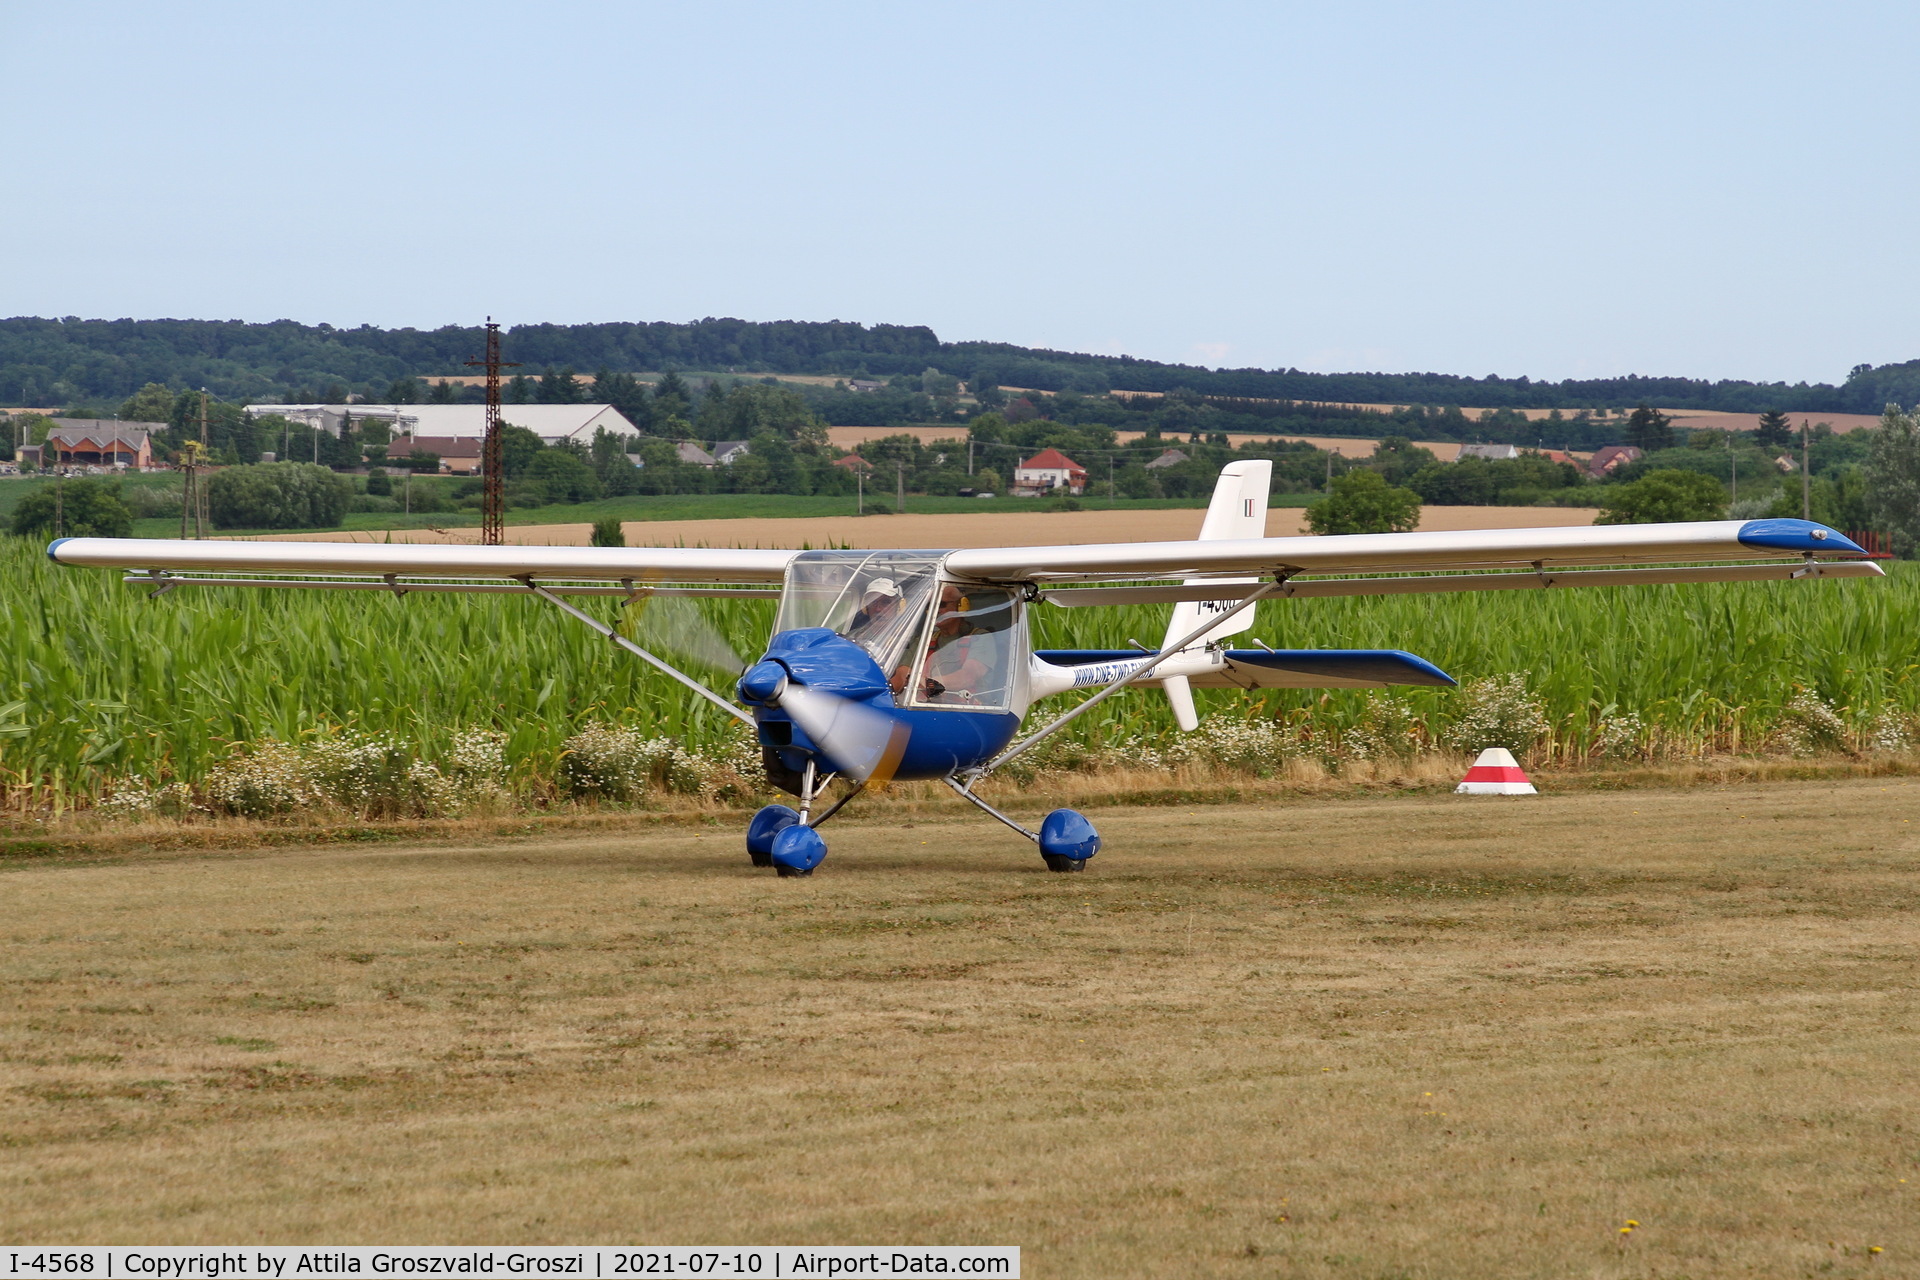 I-4568, Fly Synthesis Storch C/N 89, Becsehely Airport, Hungary